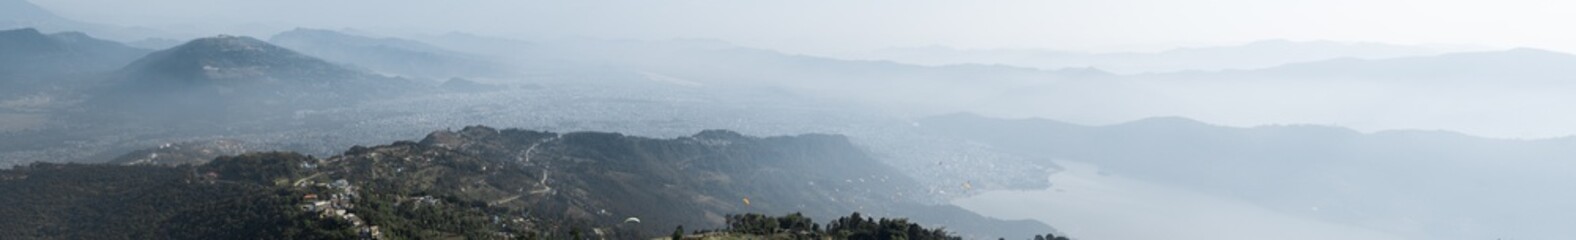 Panoramic view of paragliders over Pokhara, Nepal from Sarangkot hill